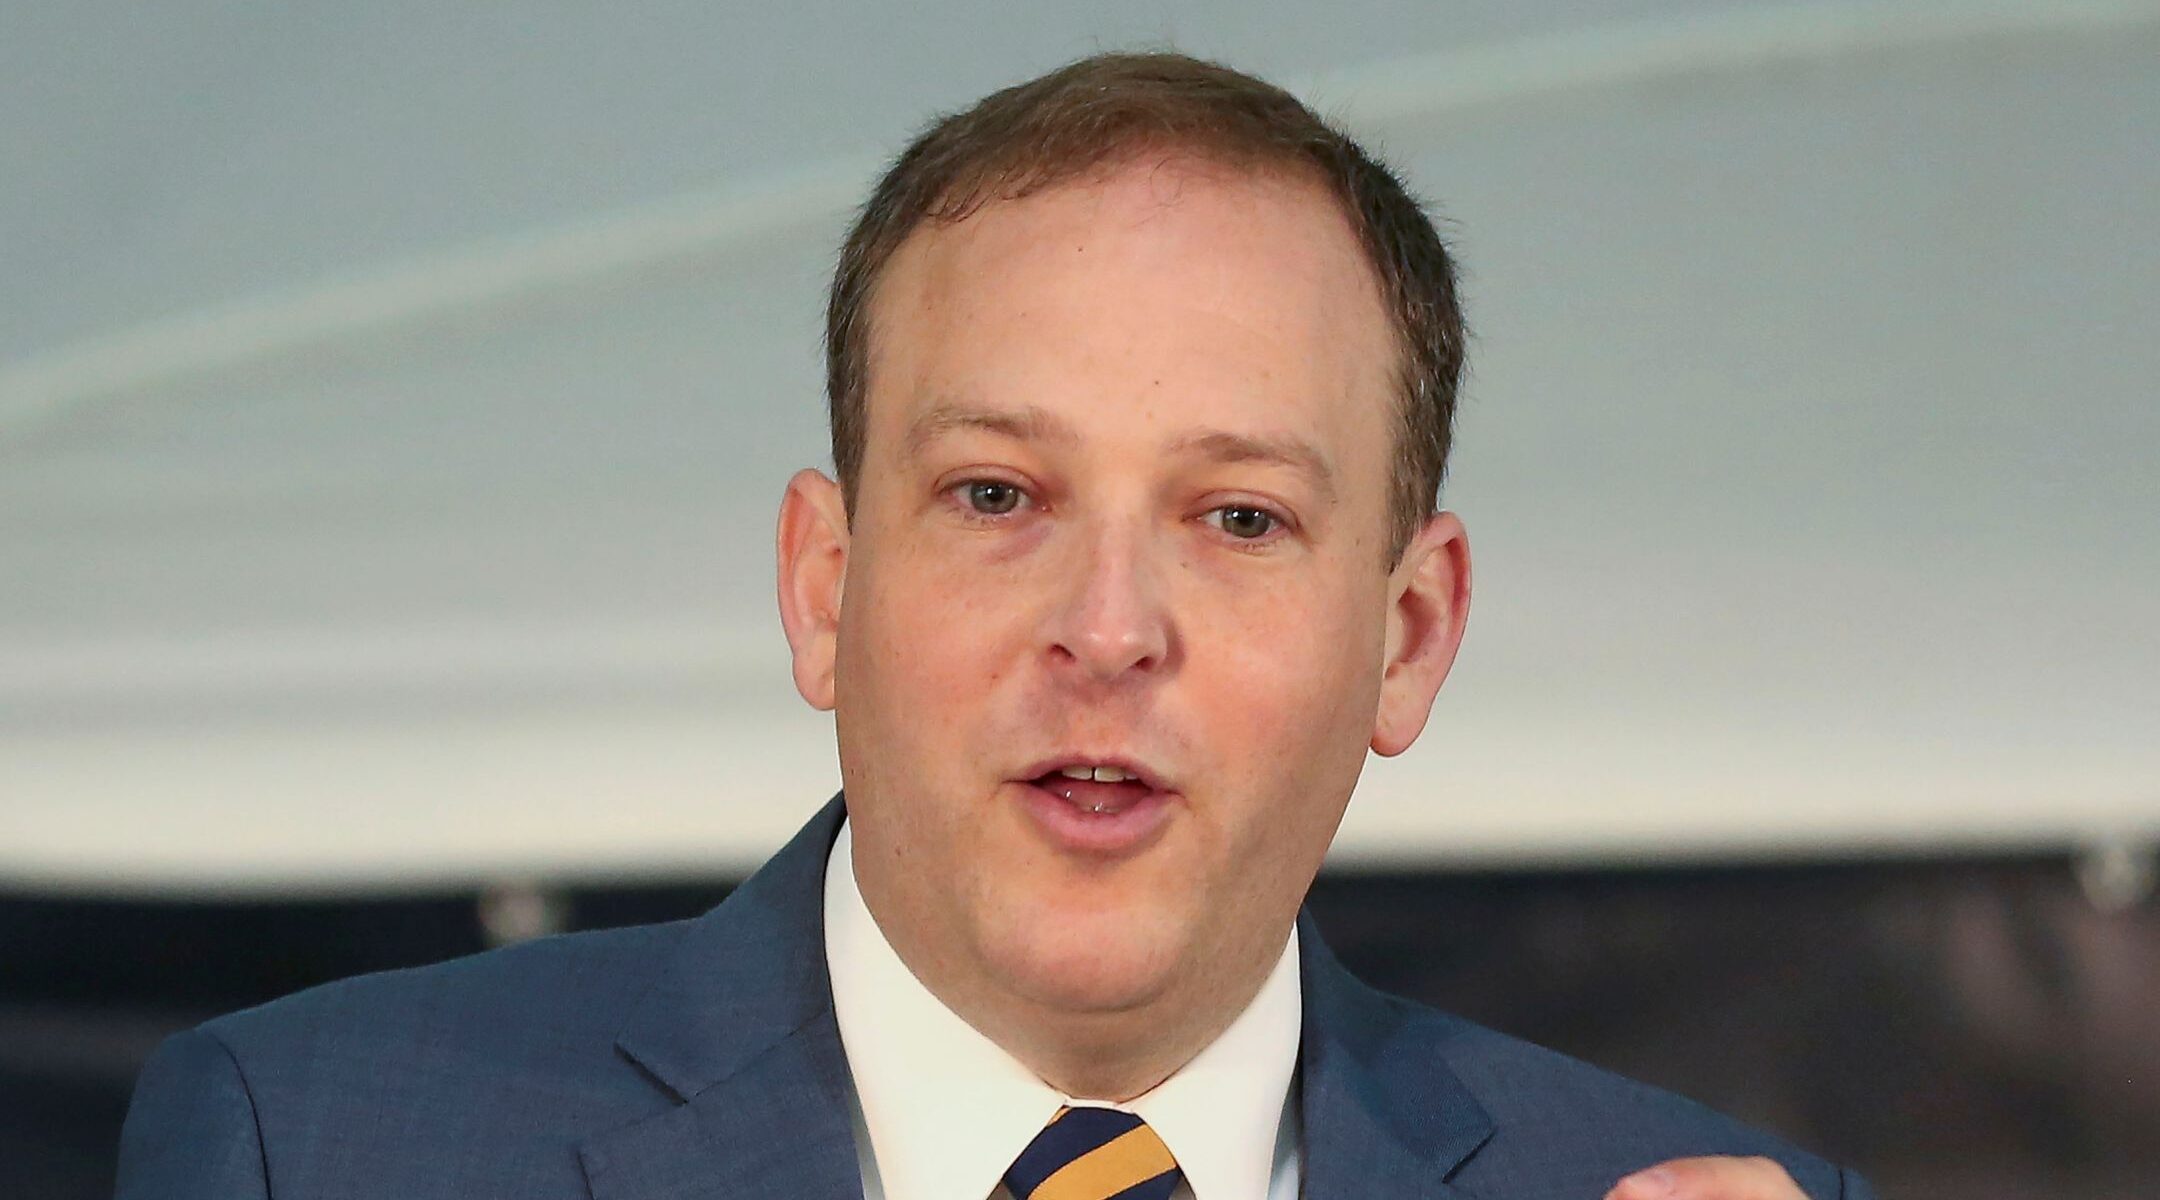 Lee Zeldin, leading Jewish pro-Trump voice in Congress, announces run for  NY governor - Jewish Telegraphic Agency